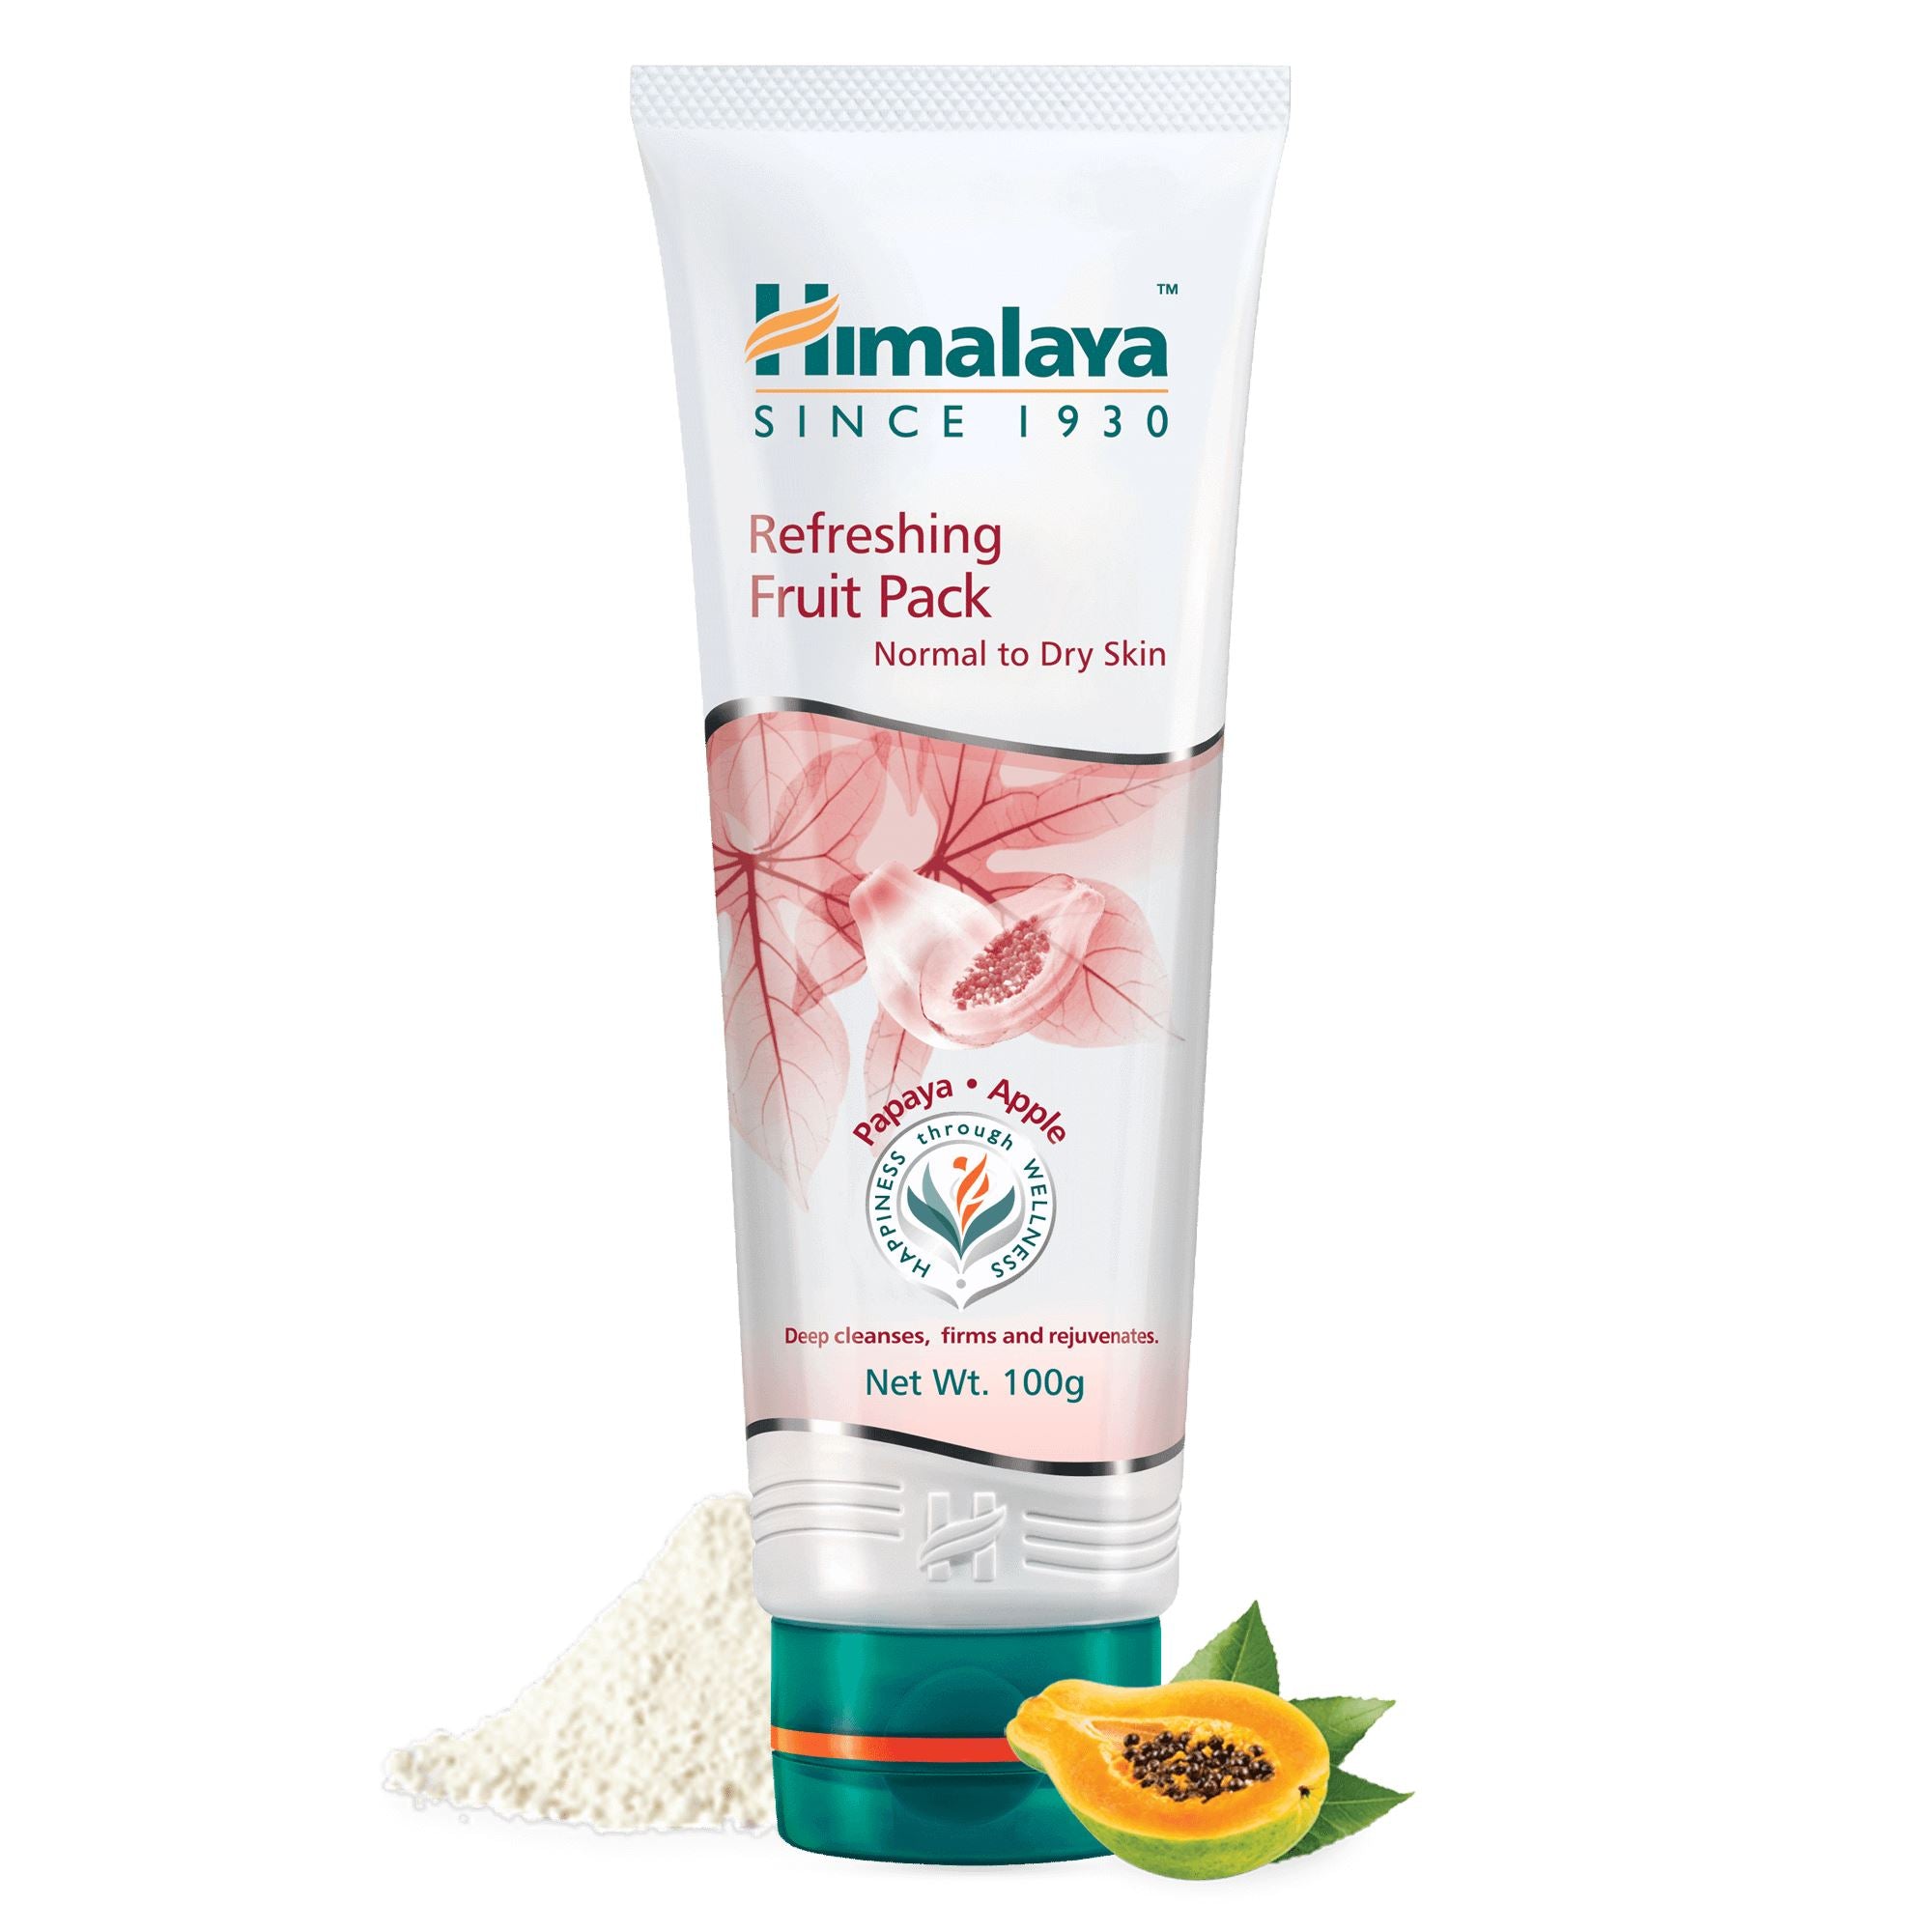 Himalaya Refreshing Fruit Pack - Deep cleanses, firms and rejuvenates